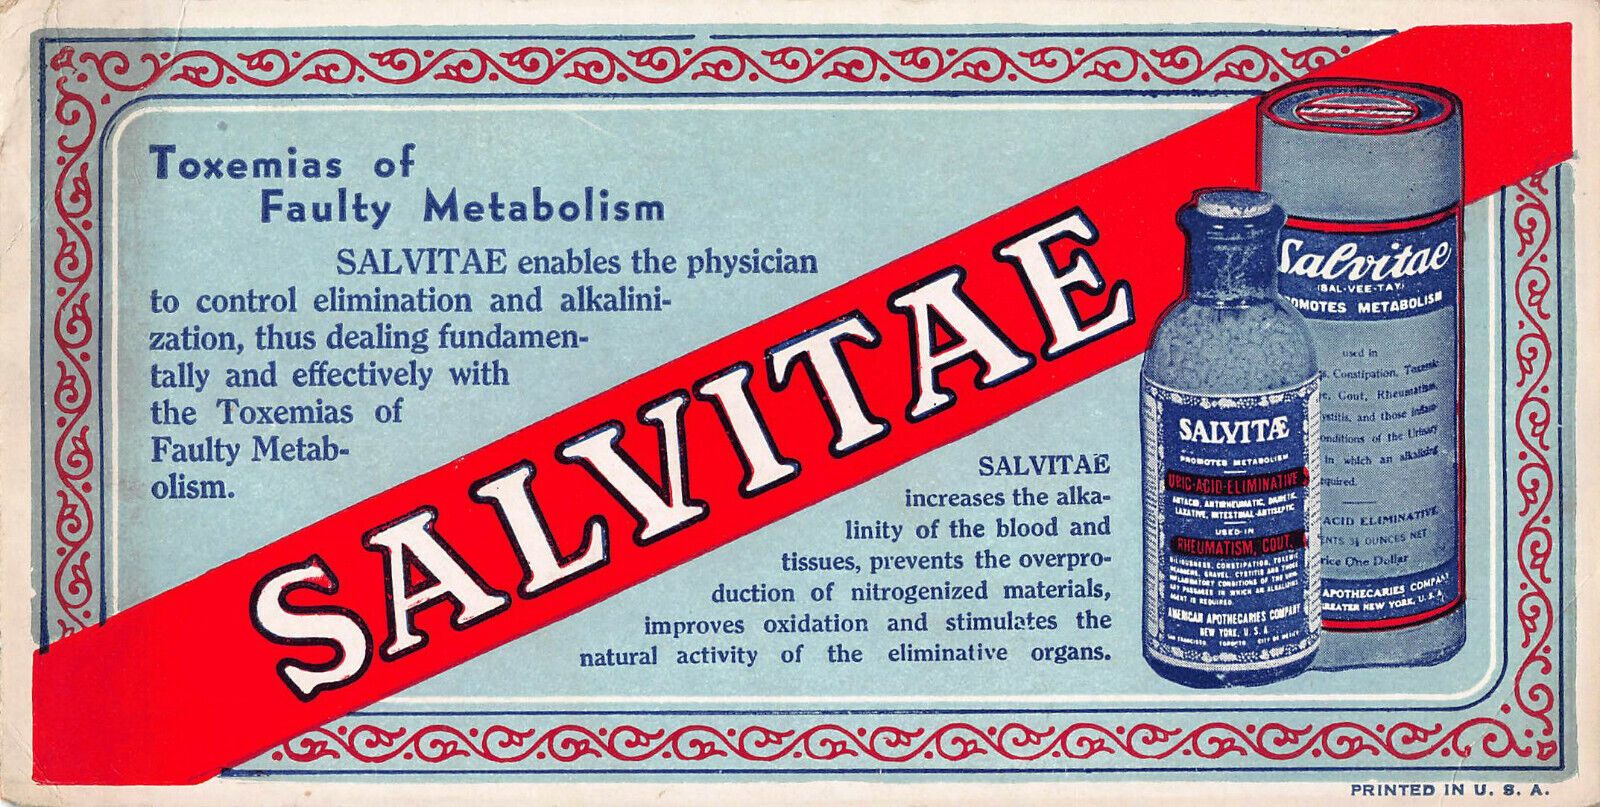 Salvitae, American Apothicaries Company, New York, Early Ink Blotter